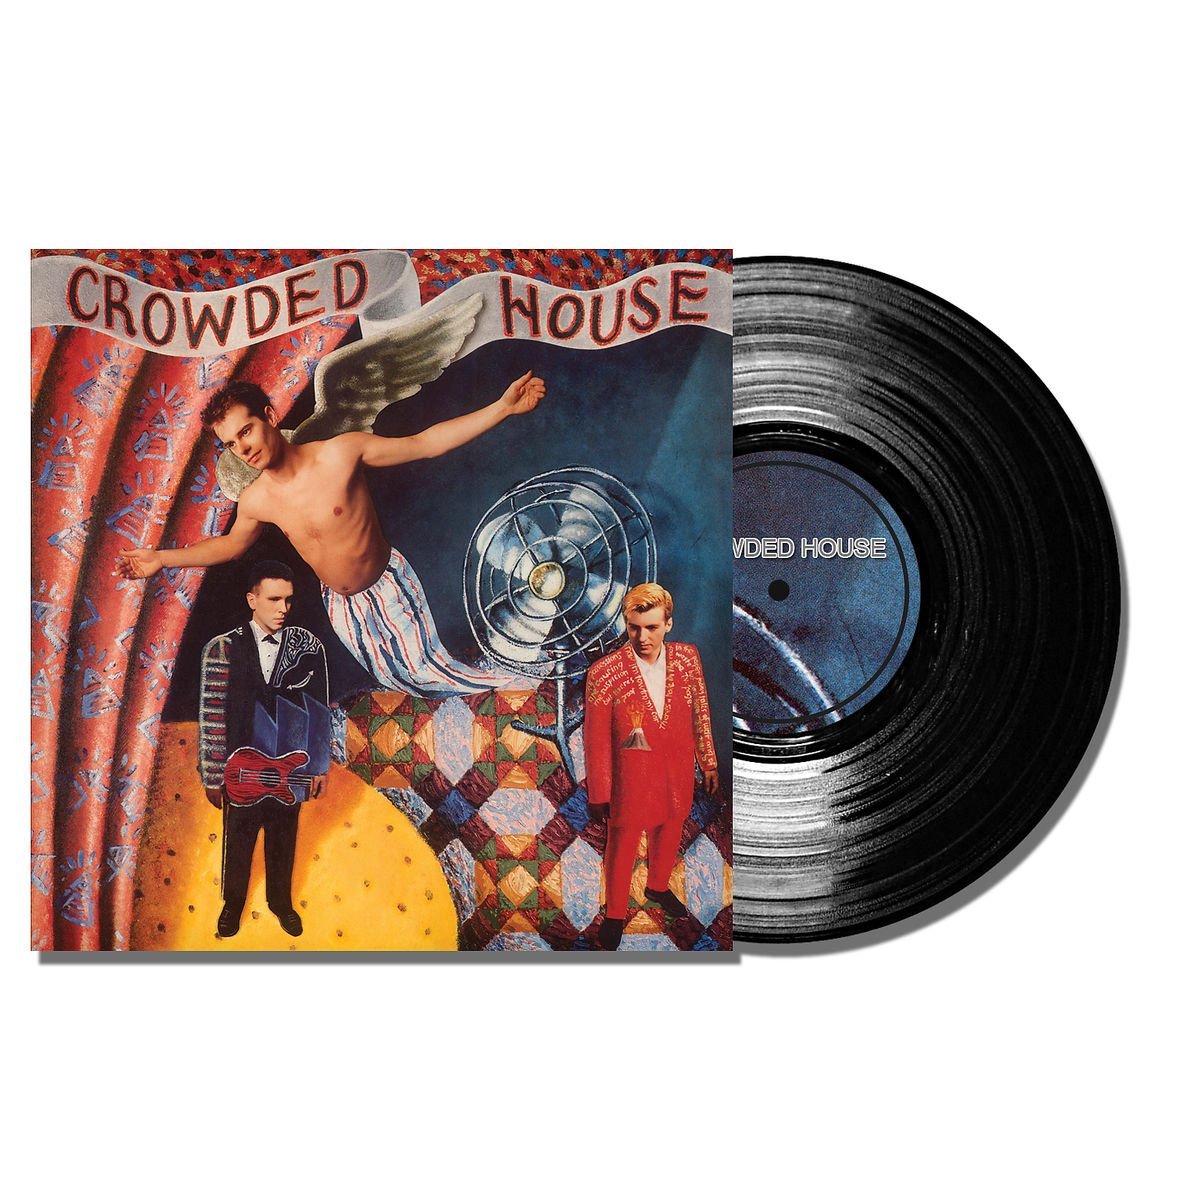 CROWDED HOUSE / クラウデッド・ハウス / CROWDED HOUSE (LP)